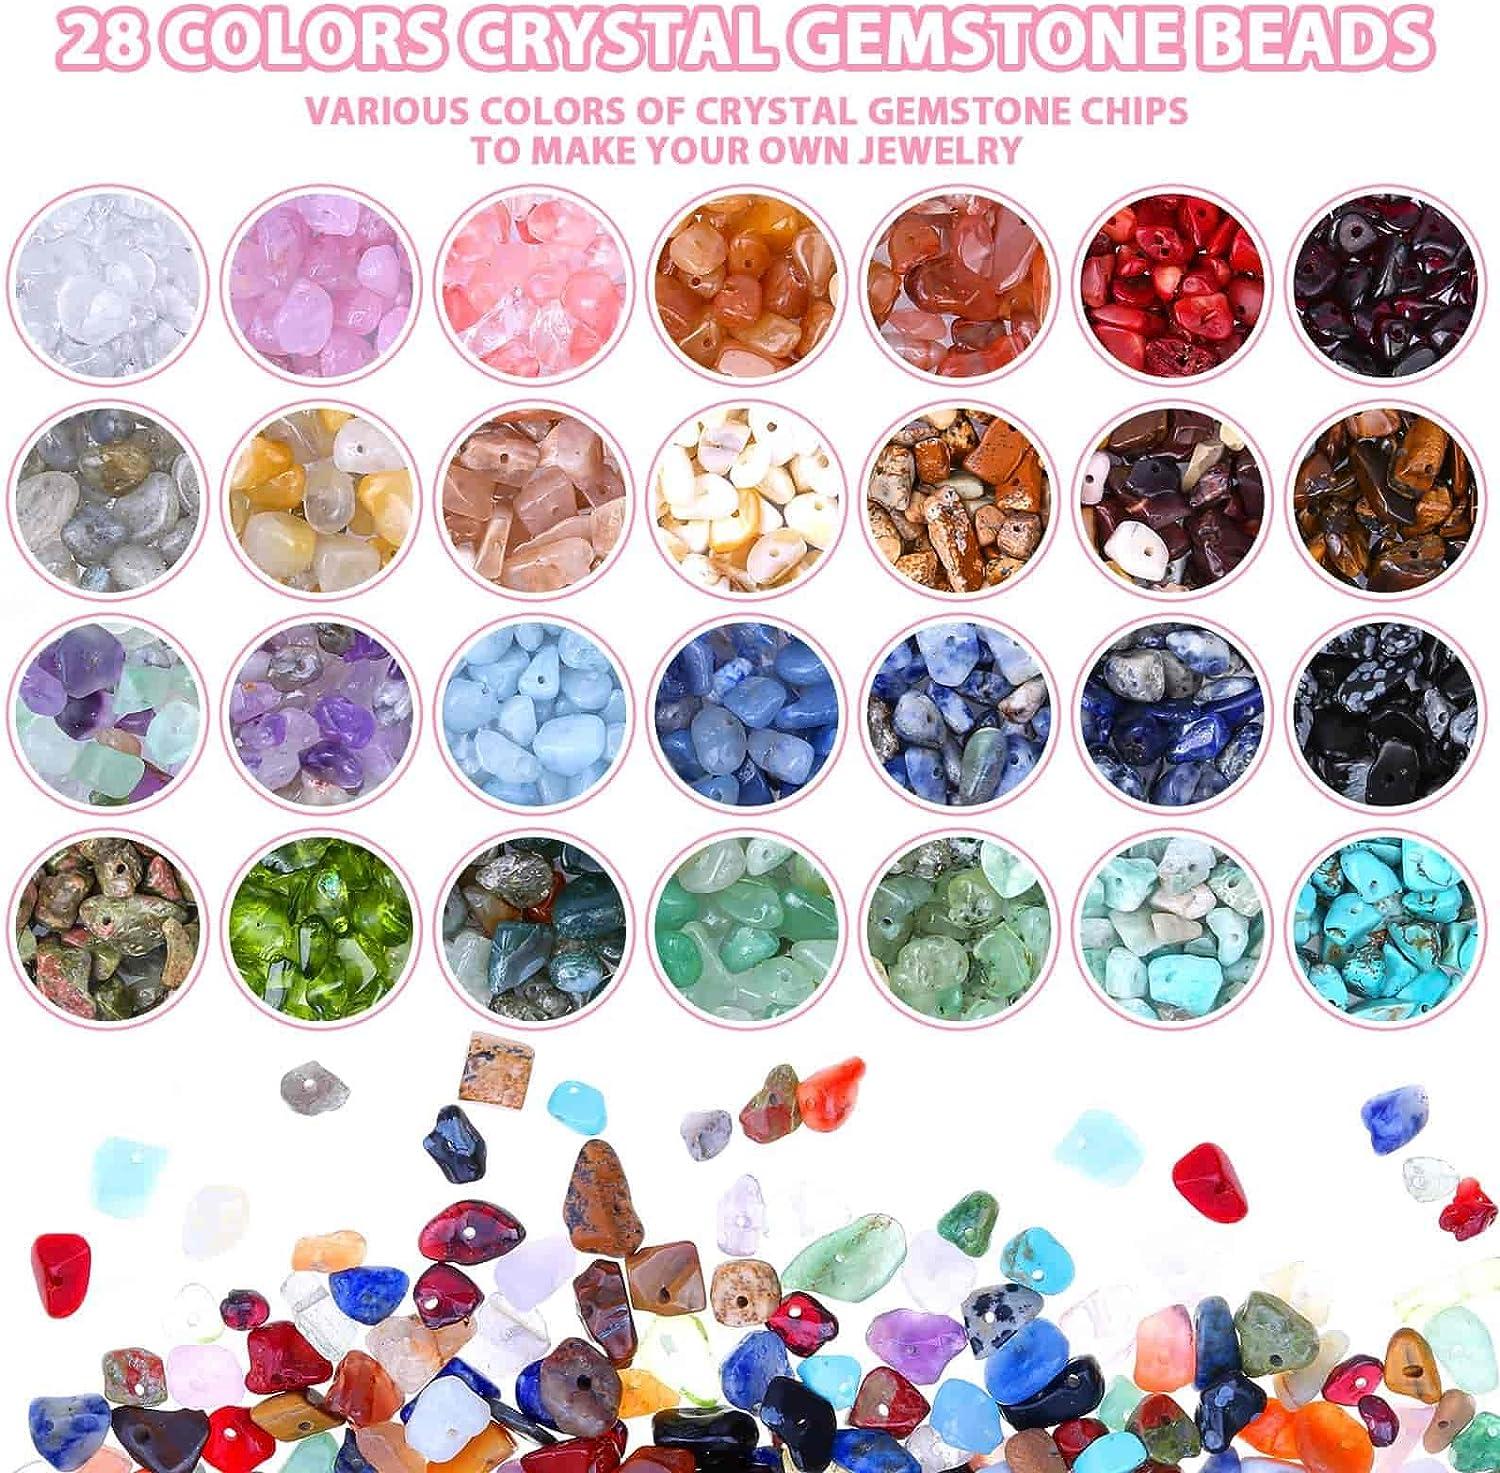 Full DIY Kit Wire Wrapping Kit Crystals Jewelry Making Kits 